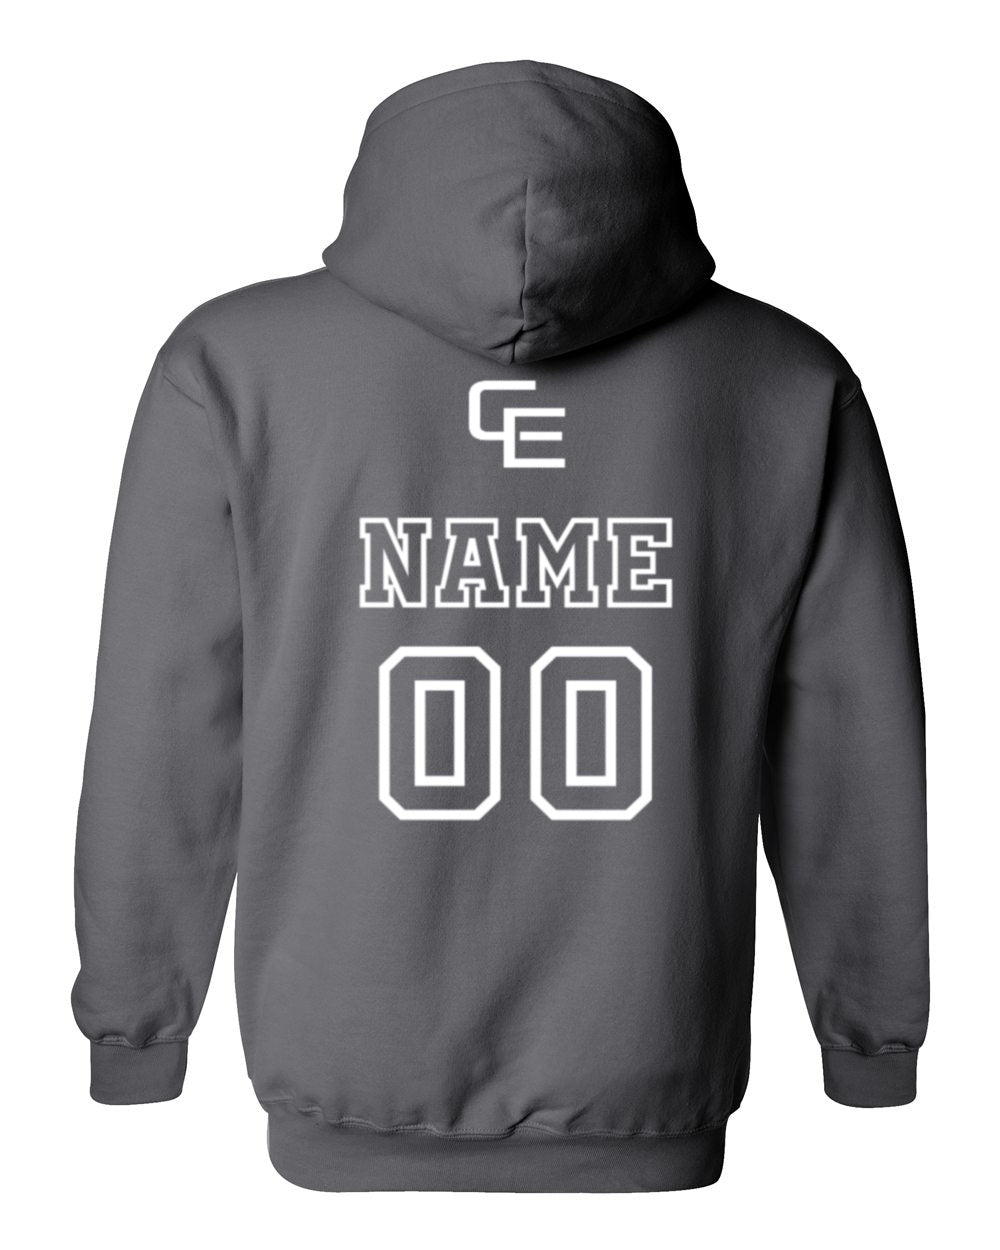 The Bases Loaded Hoodie